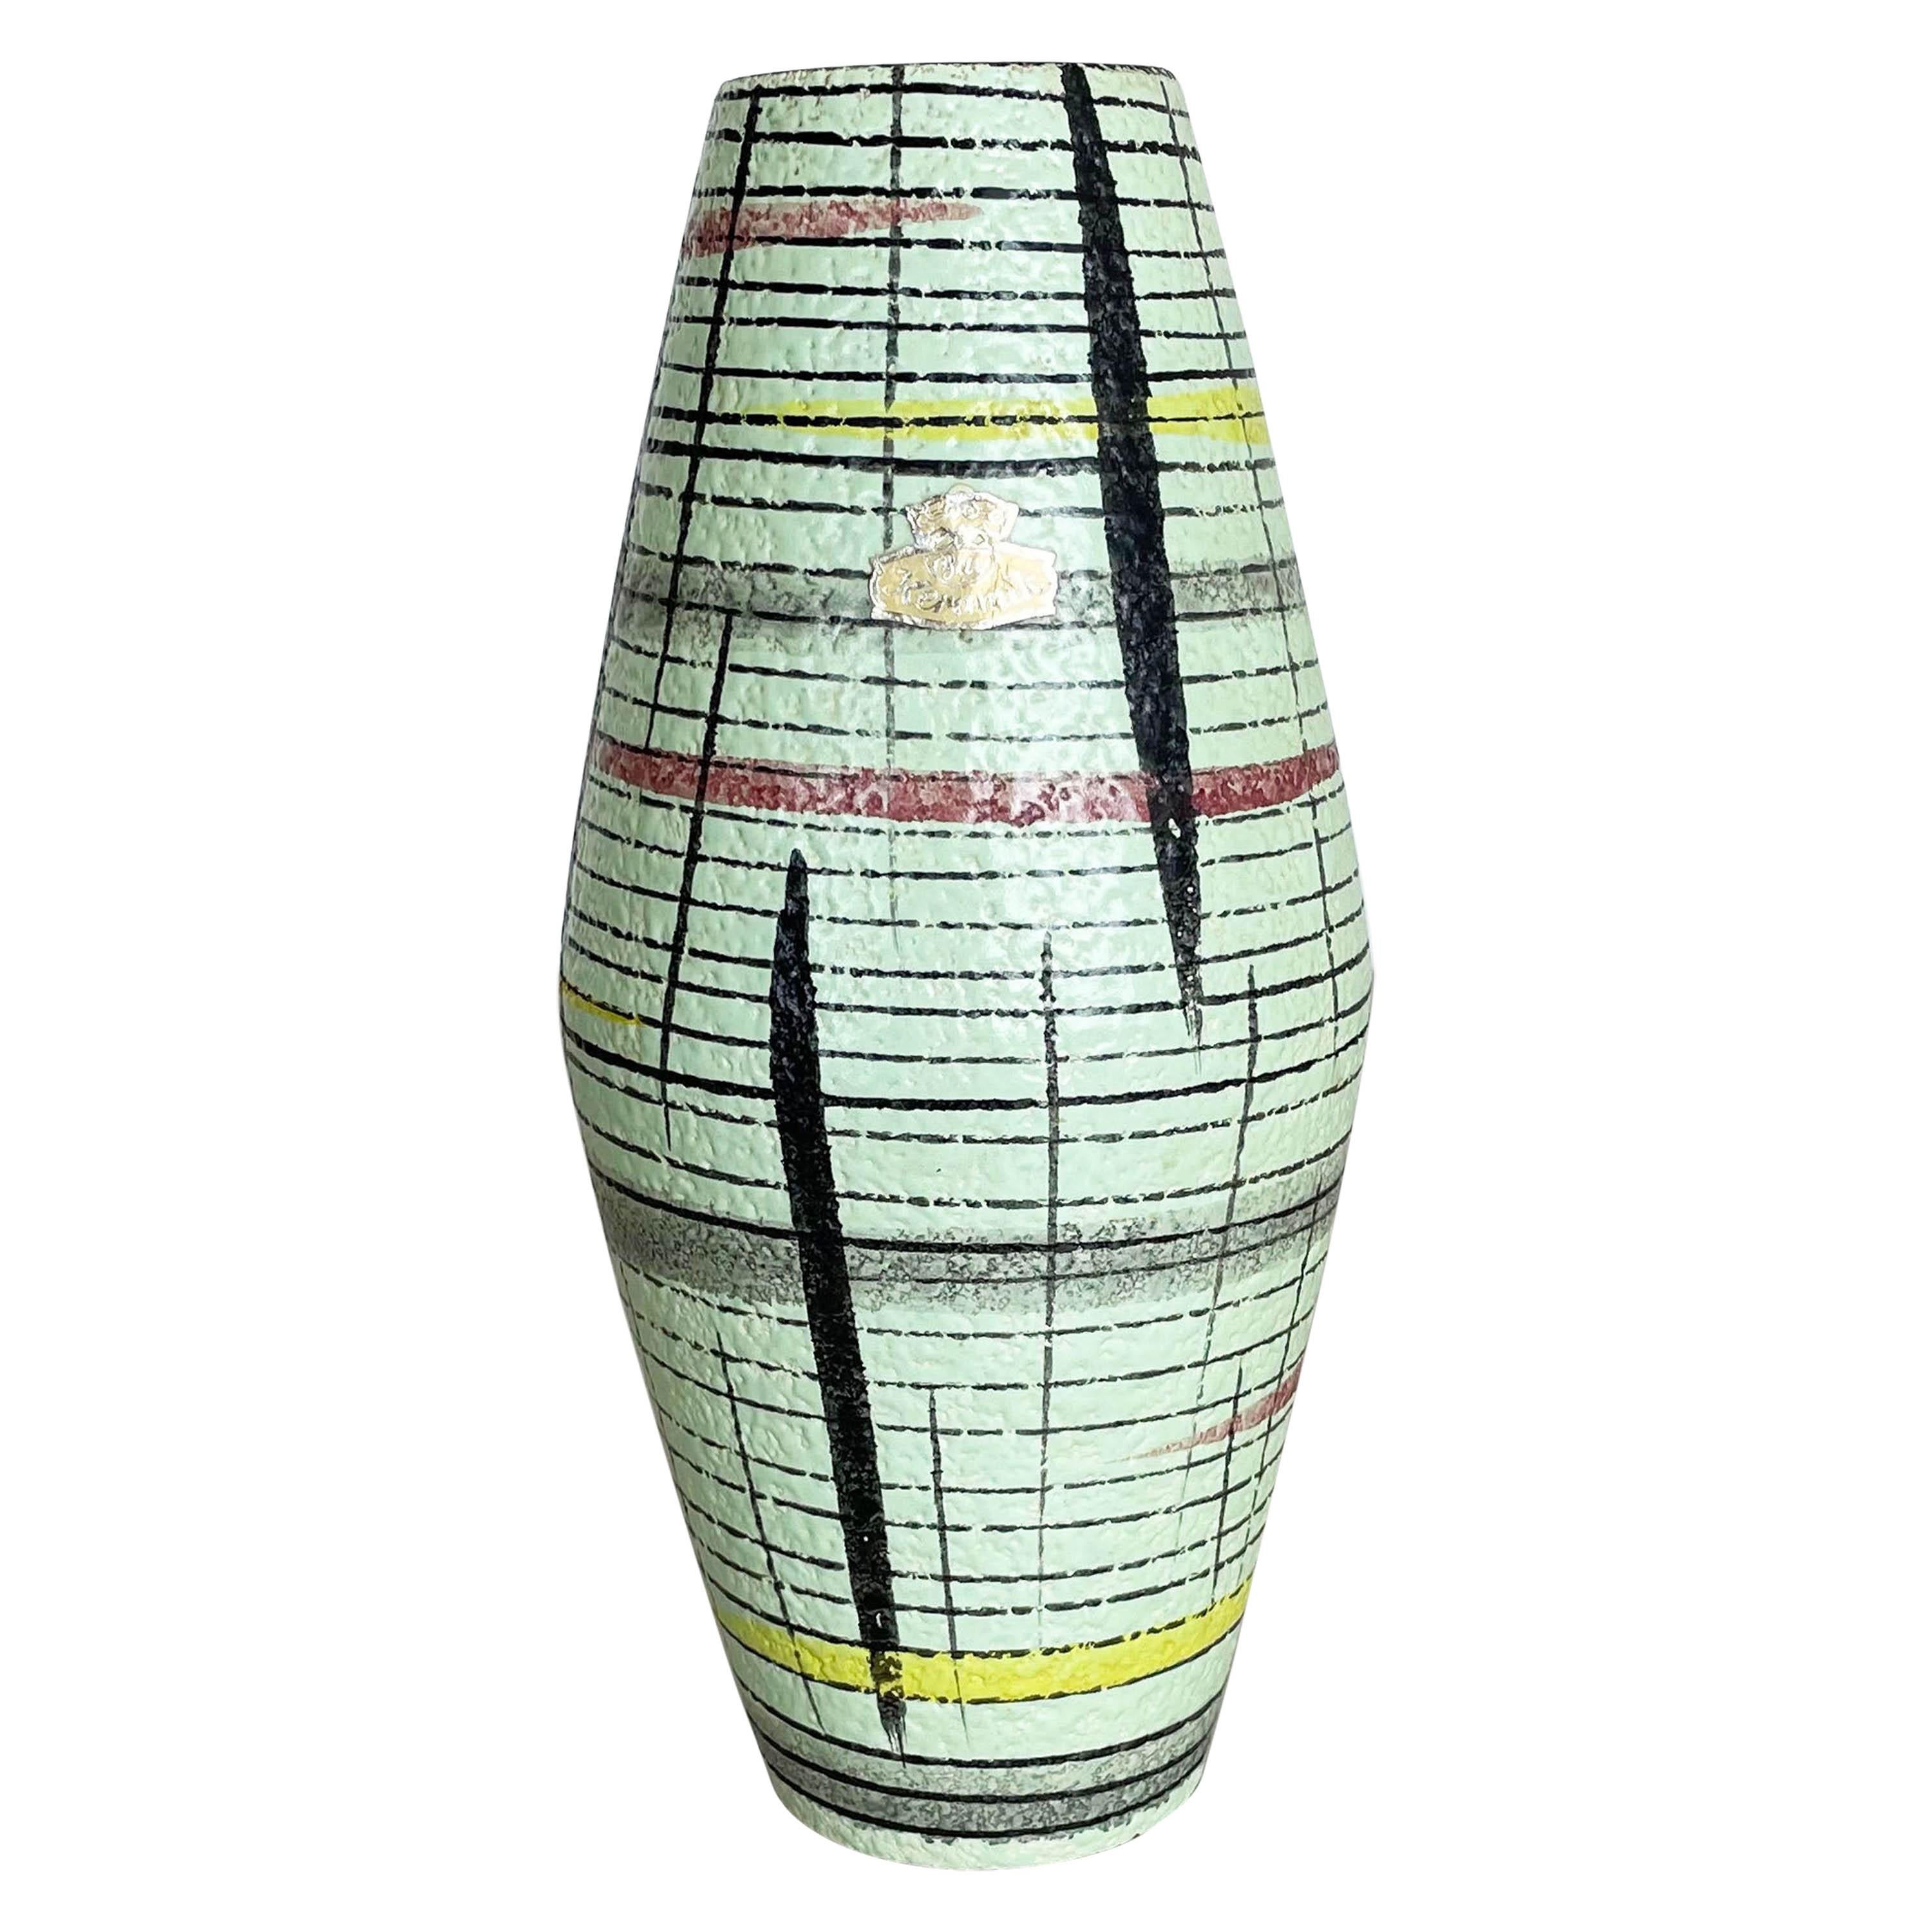 Super Colorful Fat Lava Pottery "307-25" Vase by Bay Ceramics, Germany, 1950s